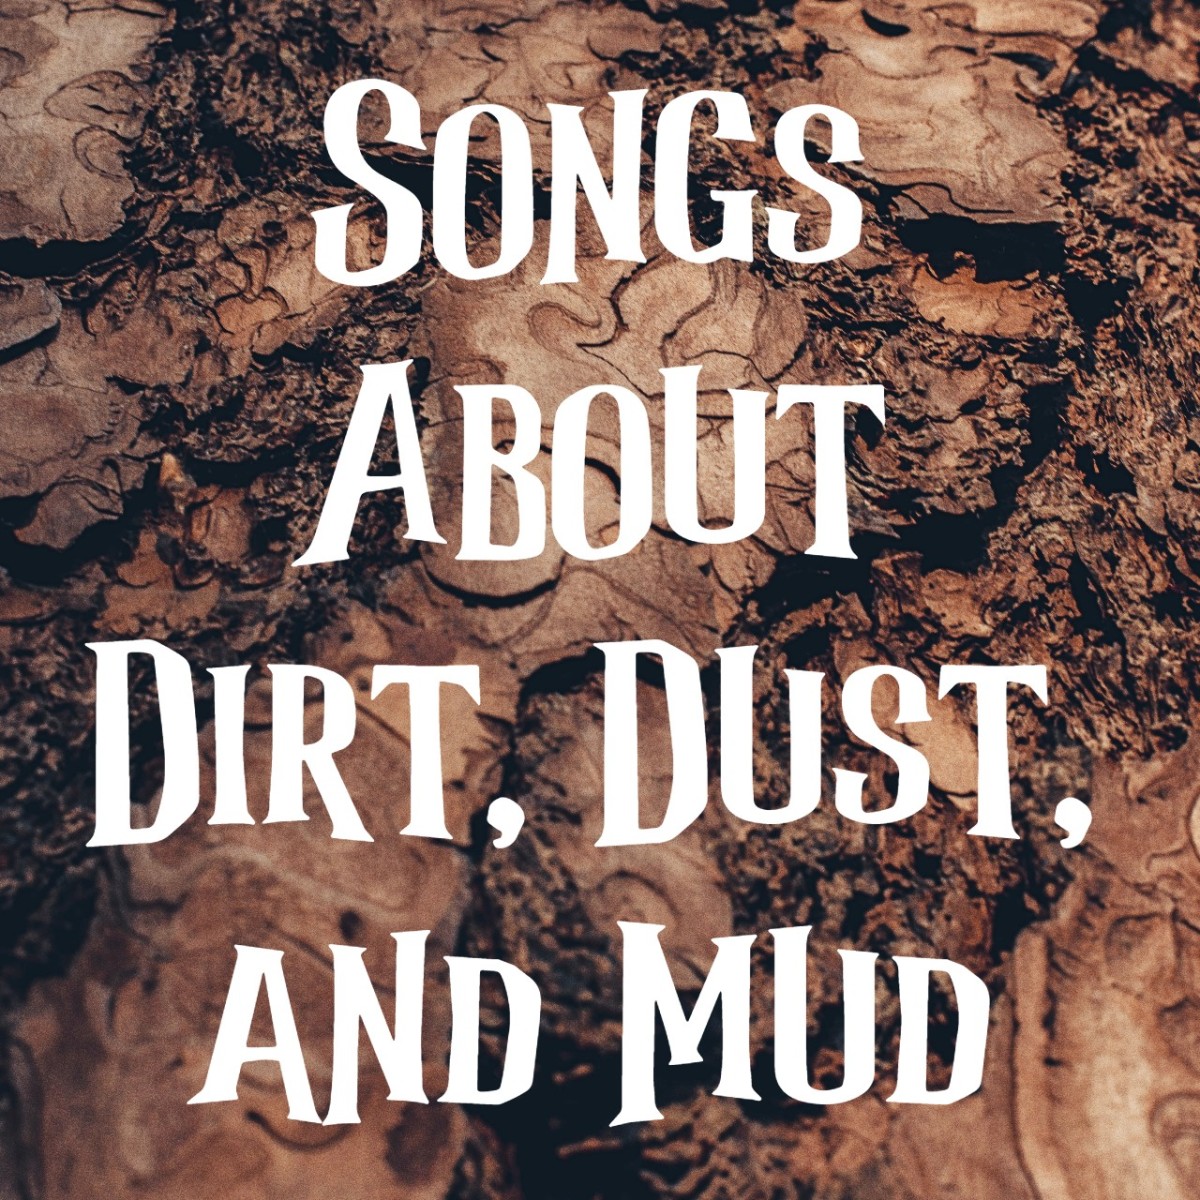 Celebrate dirt, dust, and mud with a songlist of pop, rock, and country songs. Whether you're driving on roads, kicking up dust, or enjoying muddy tires and boots, sometimes the fun in life can be found in getting dirty.